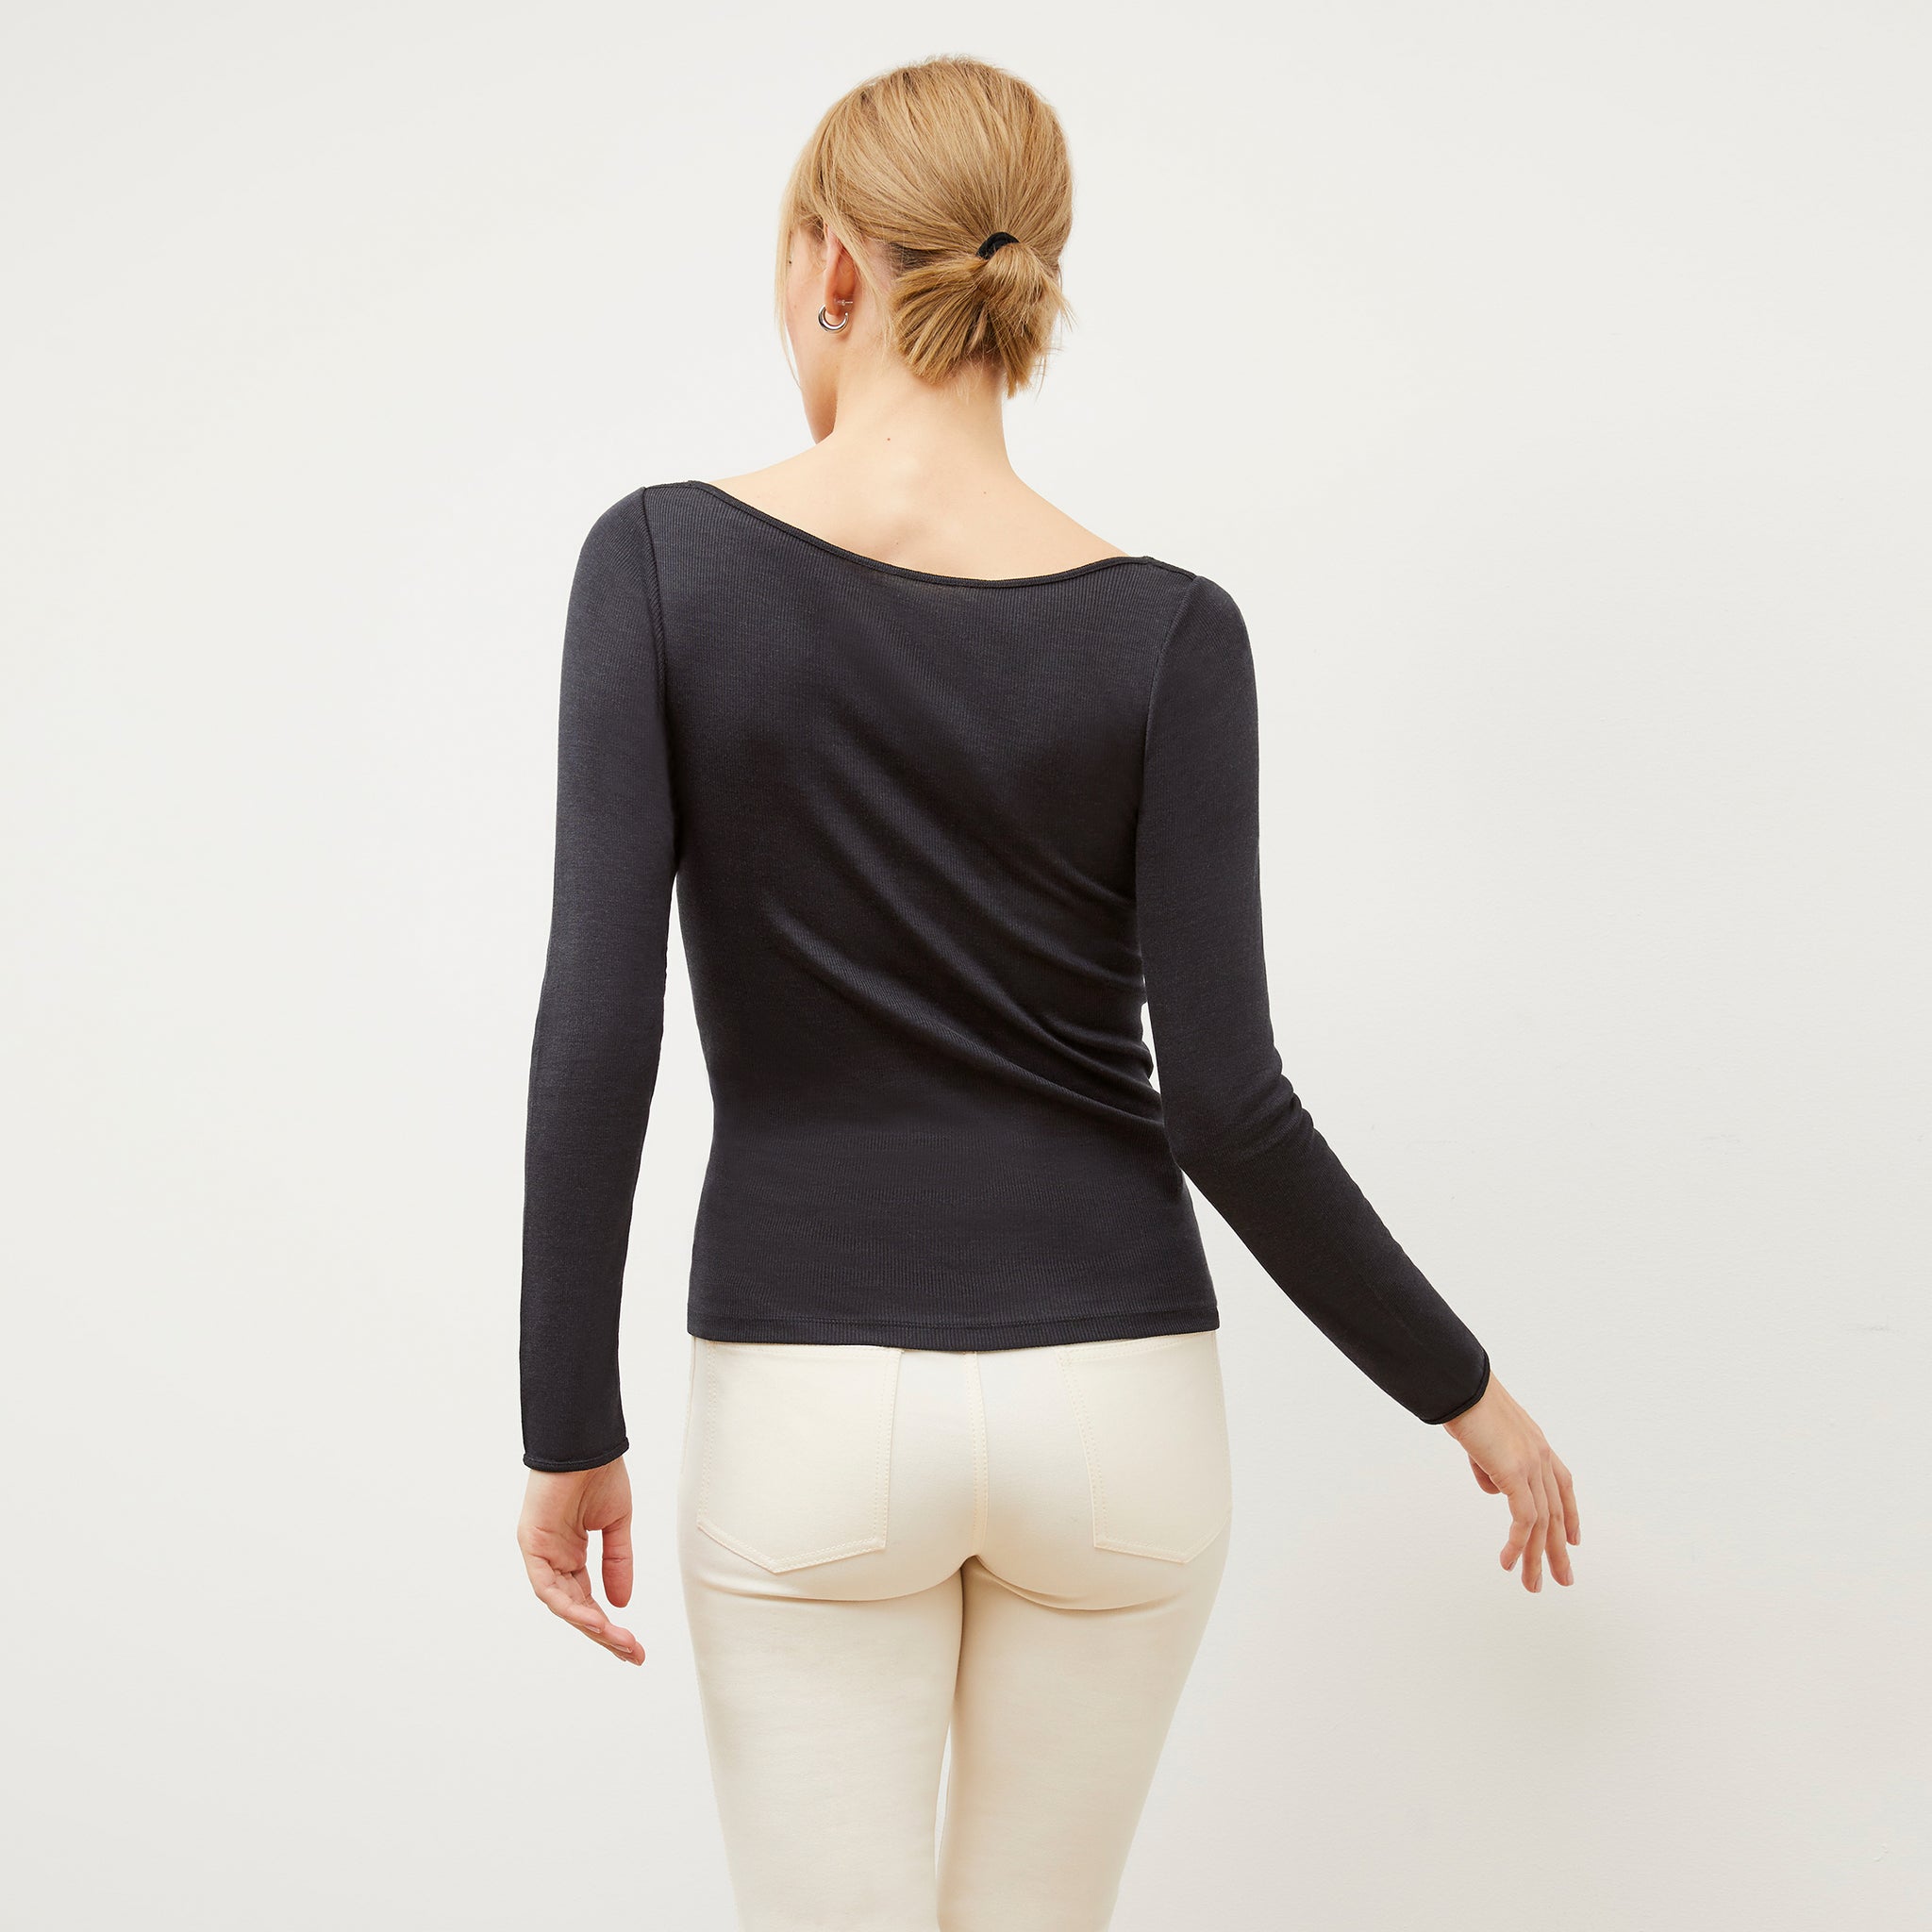 Back image of a woman wearing the Meg Top in Cool Onyx